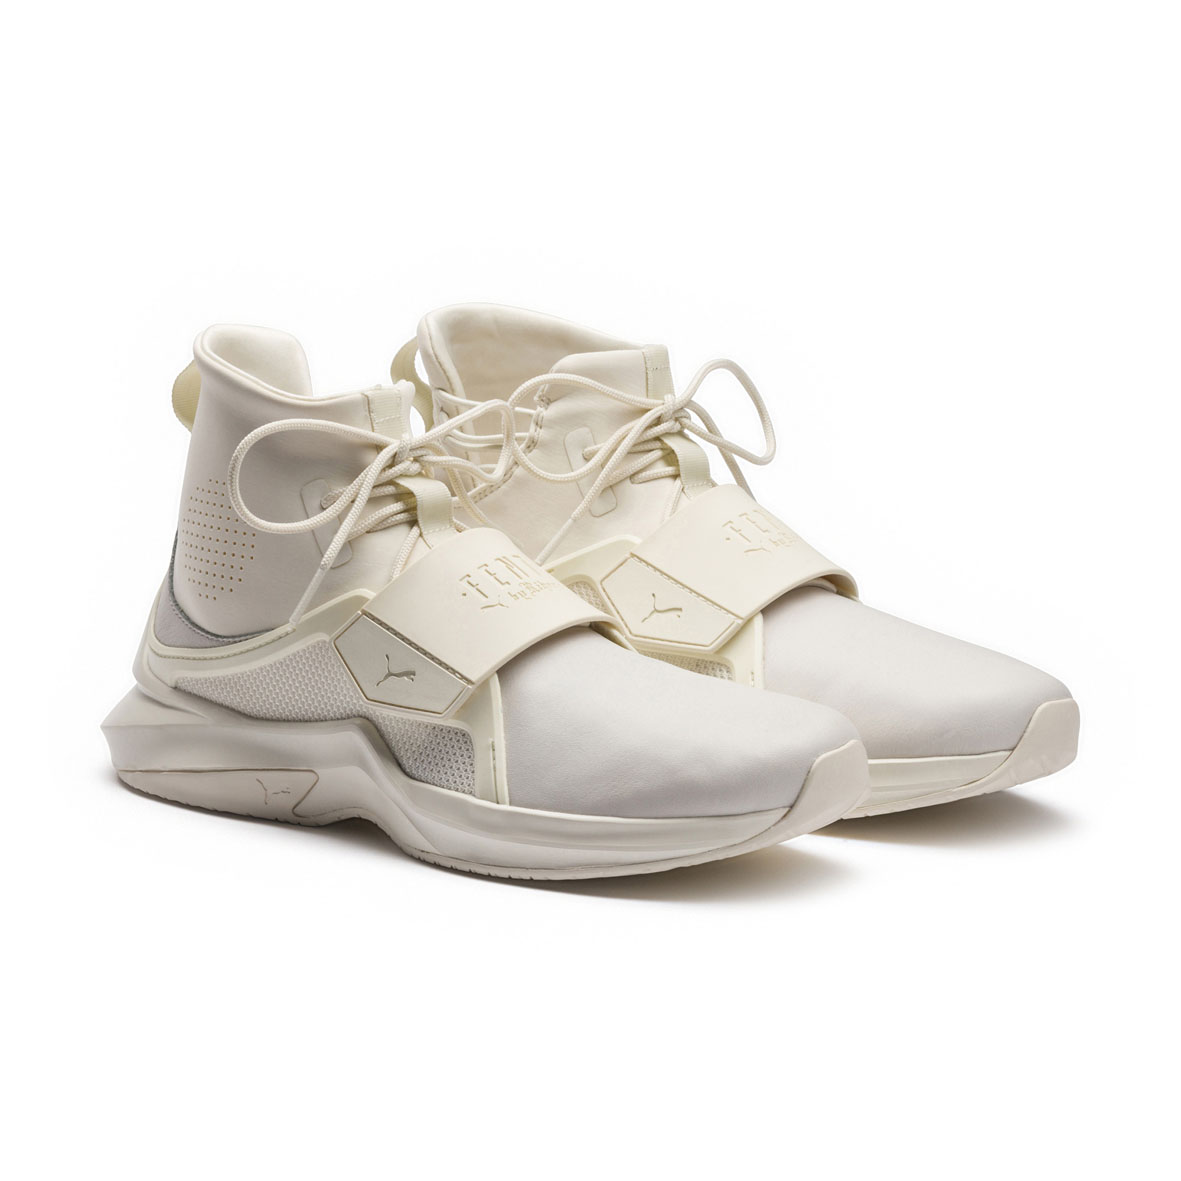 Swag Craze: Sneakers Dropping Today: Rihanna’s Fenty x PUMA Trainer in ...